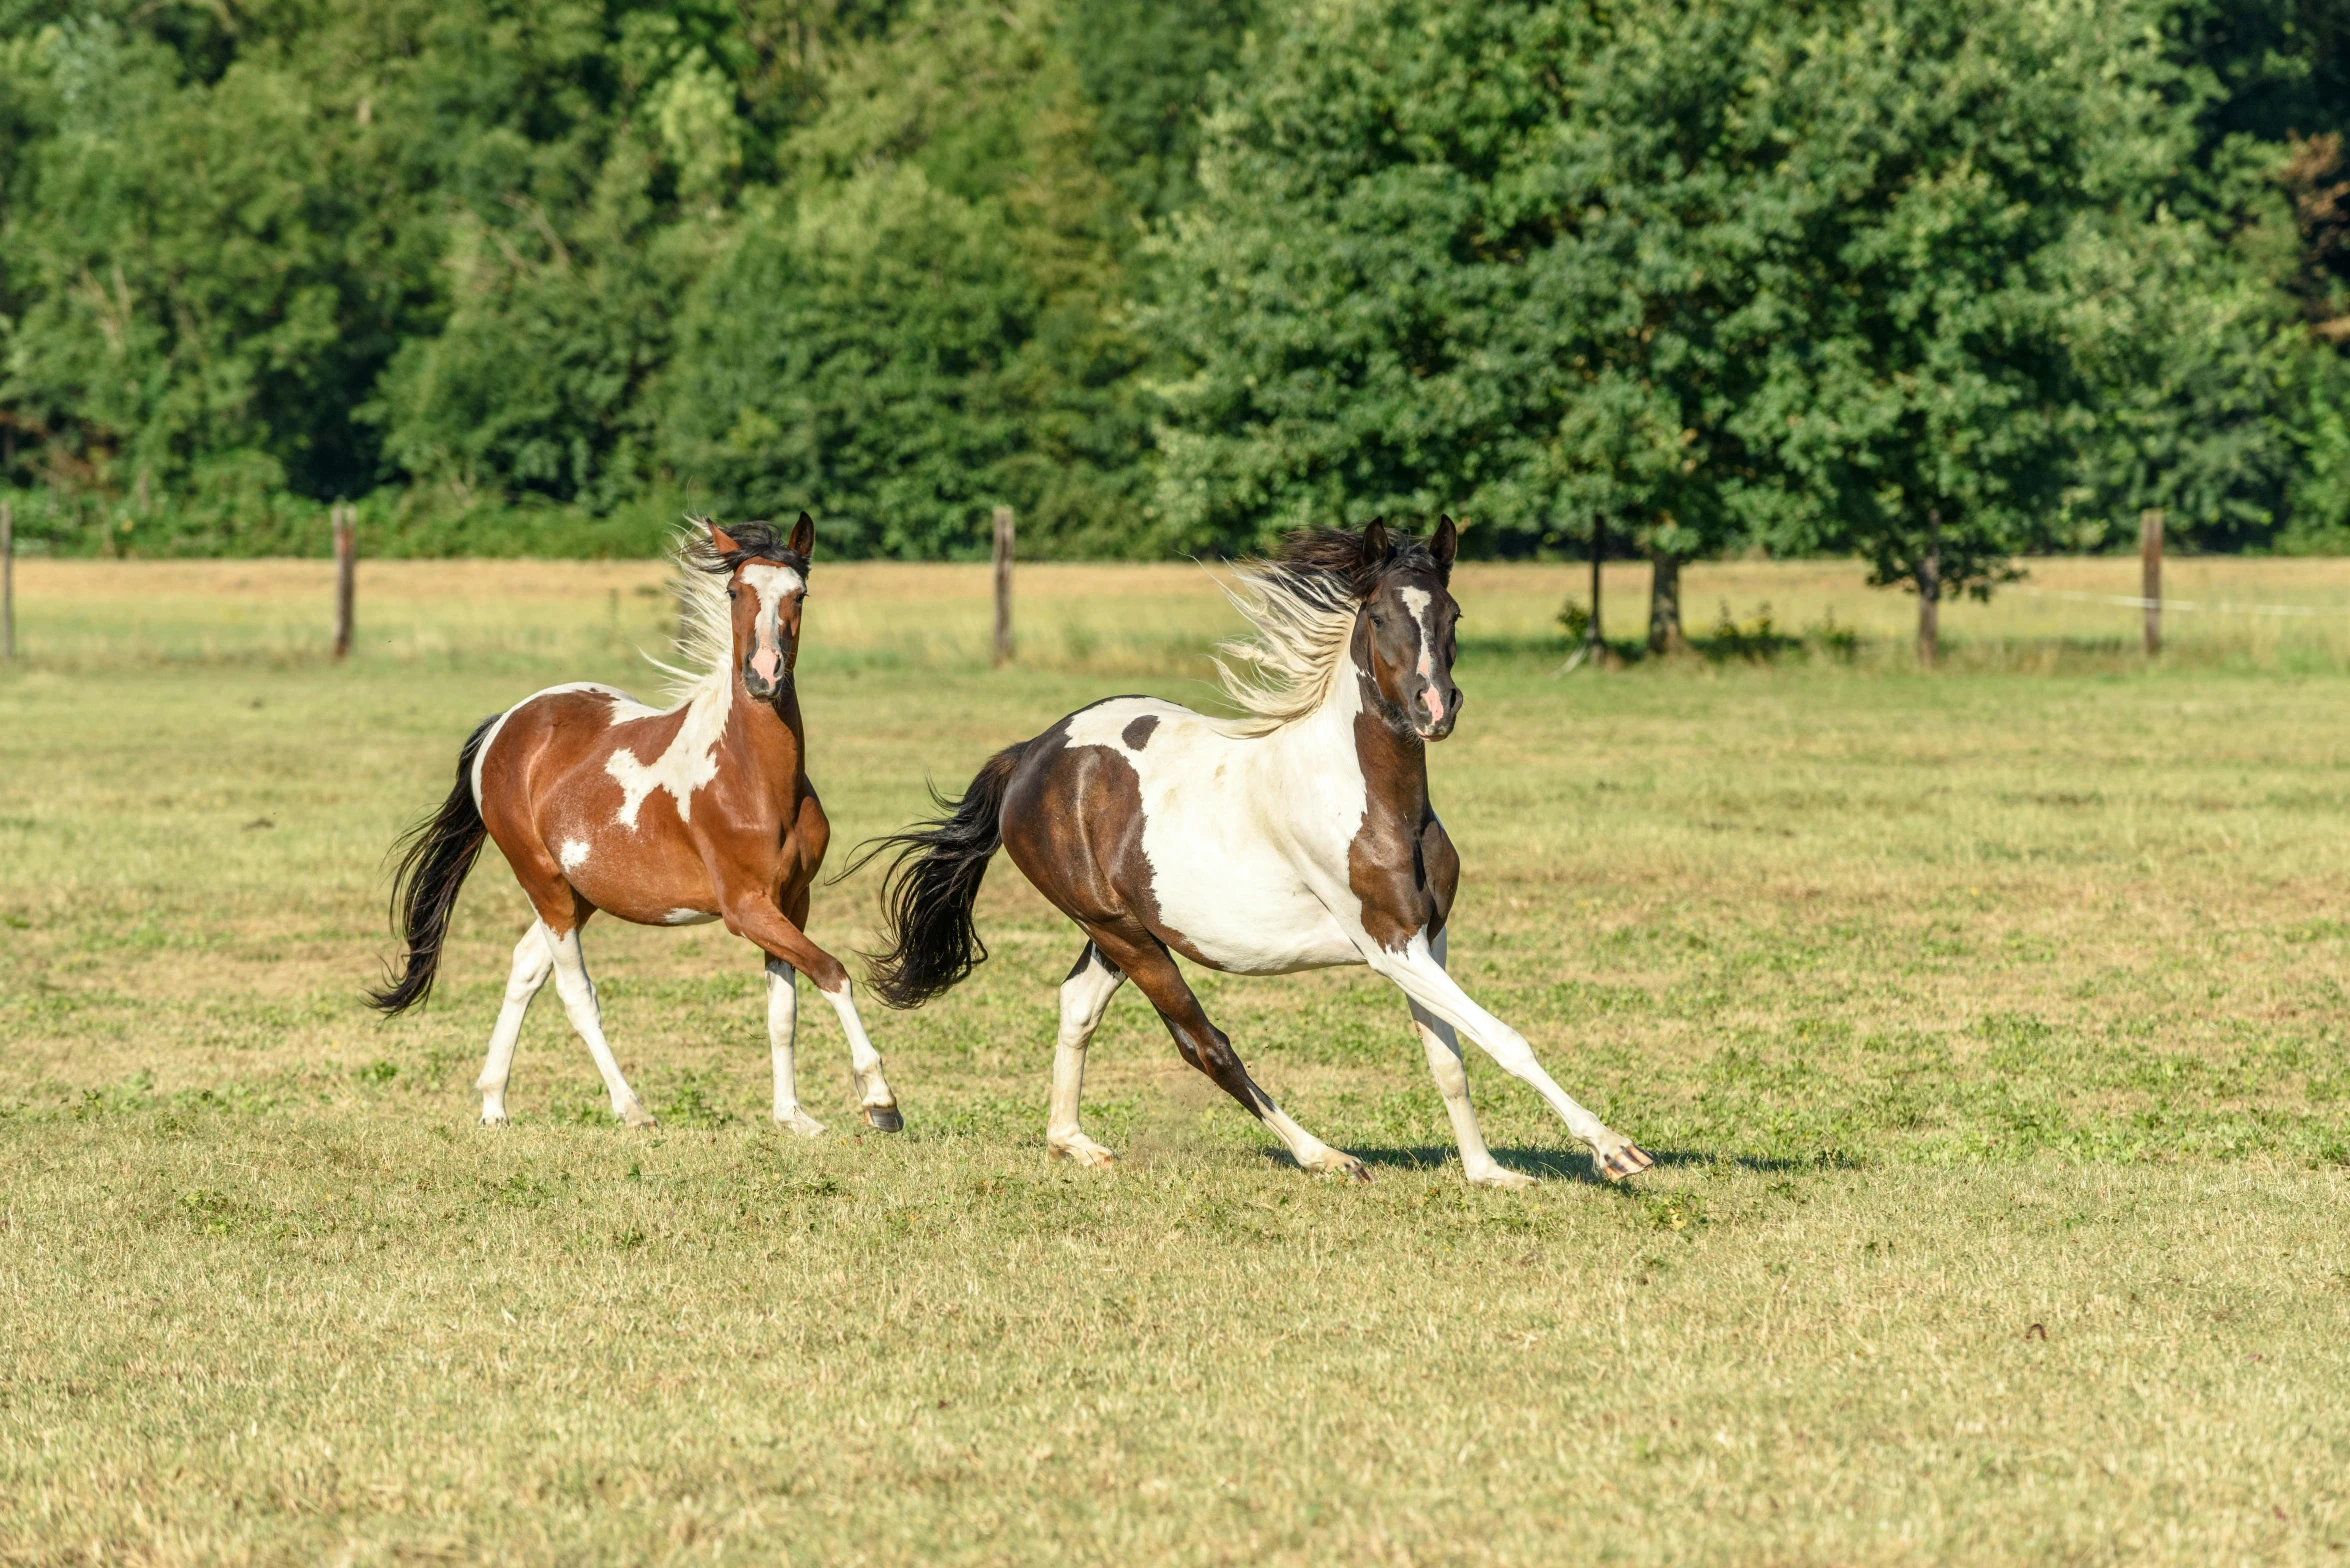 two horses running around in the open field